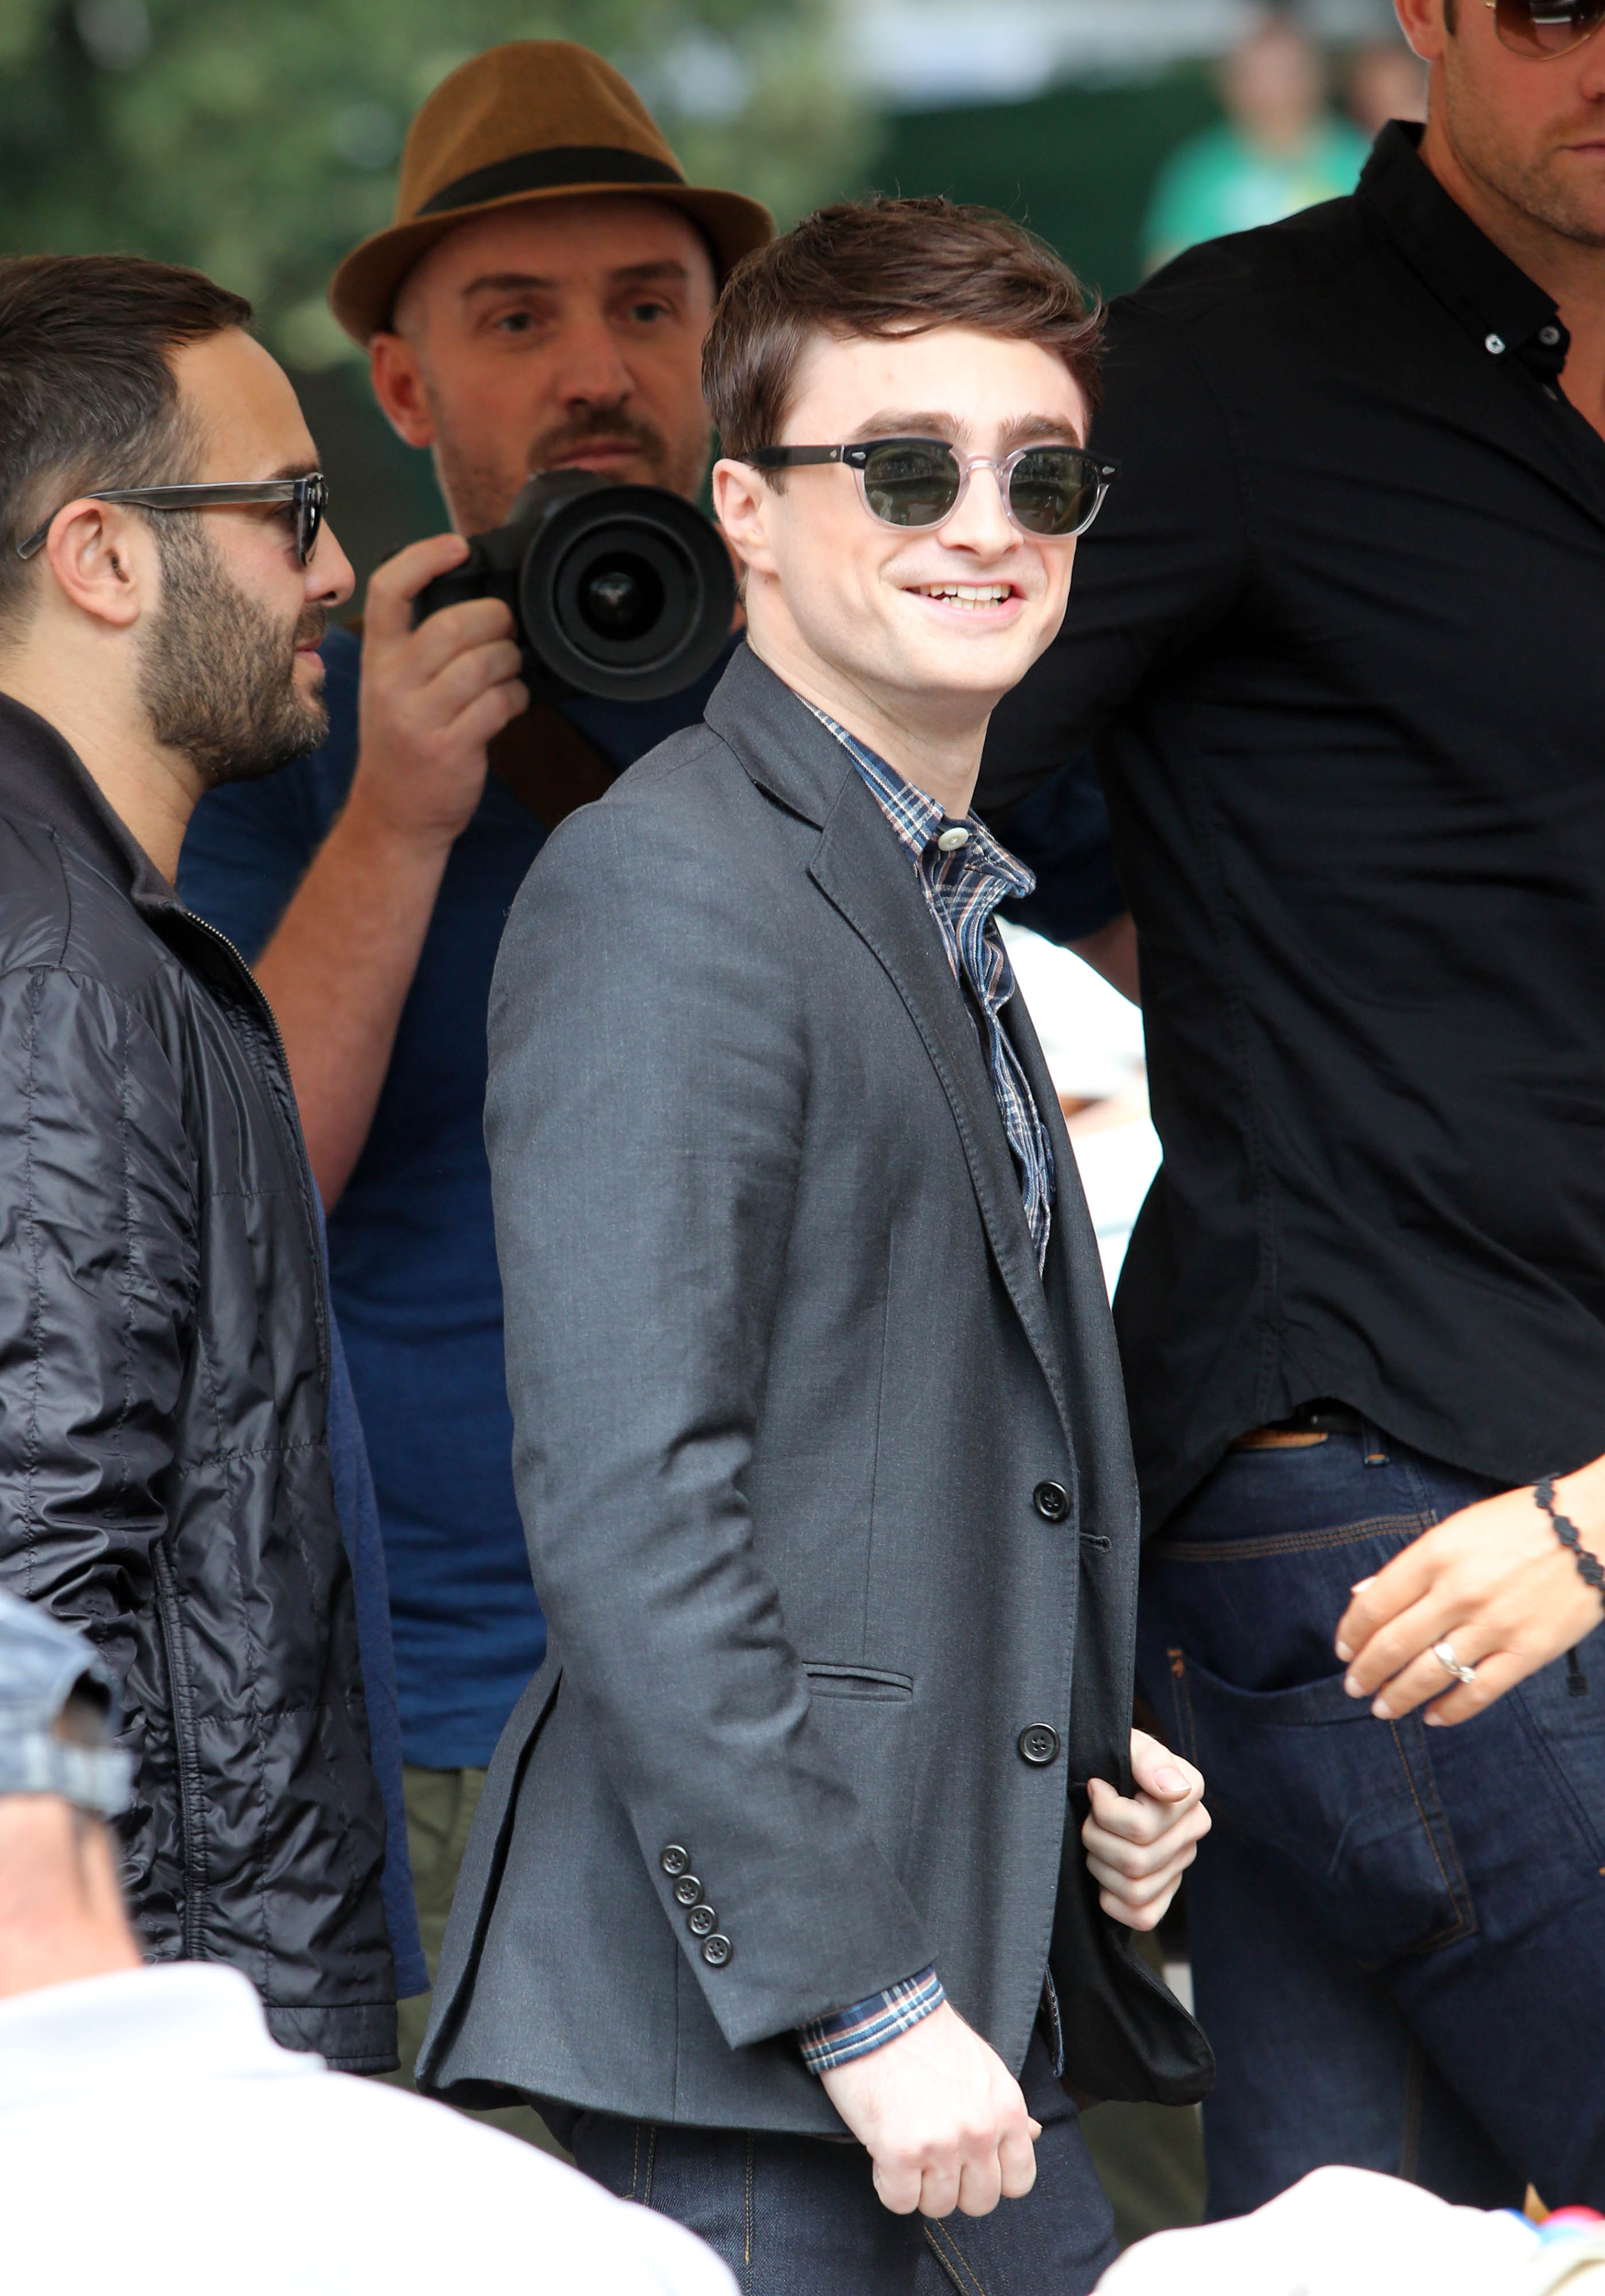 Venice Film Festival Well Played, Daniel Radcliffe